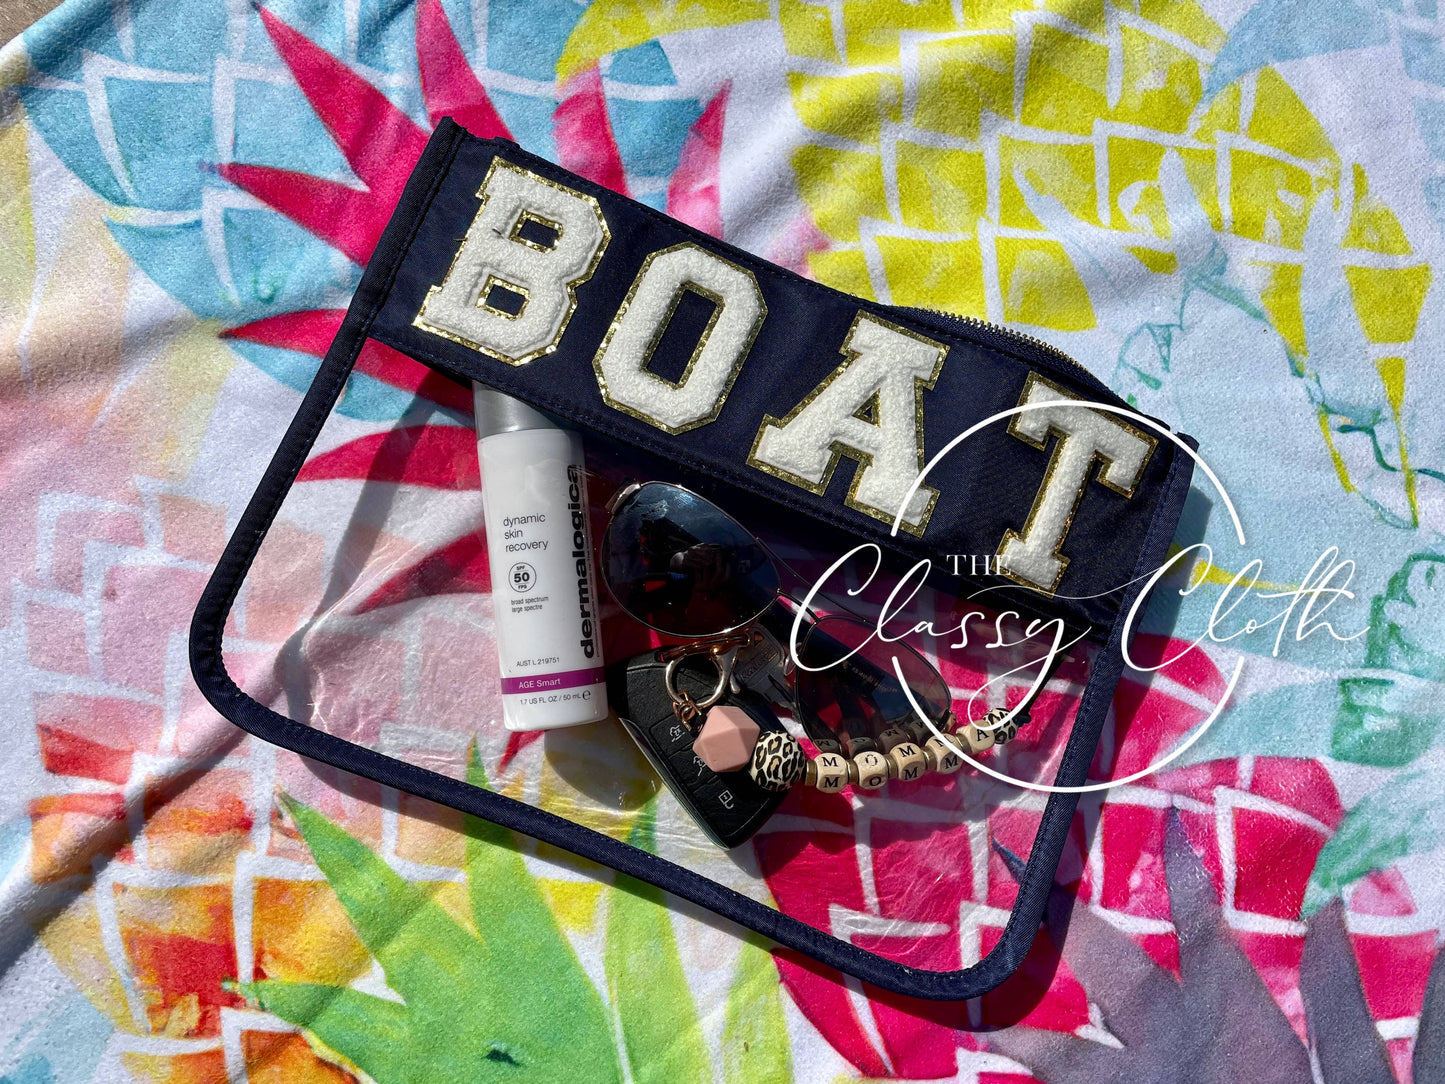 Chenille Letter Clear Pouch - BOAT RTS